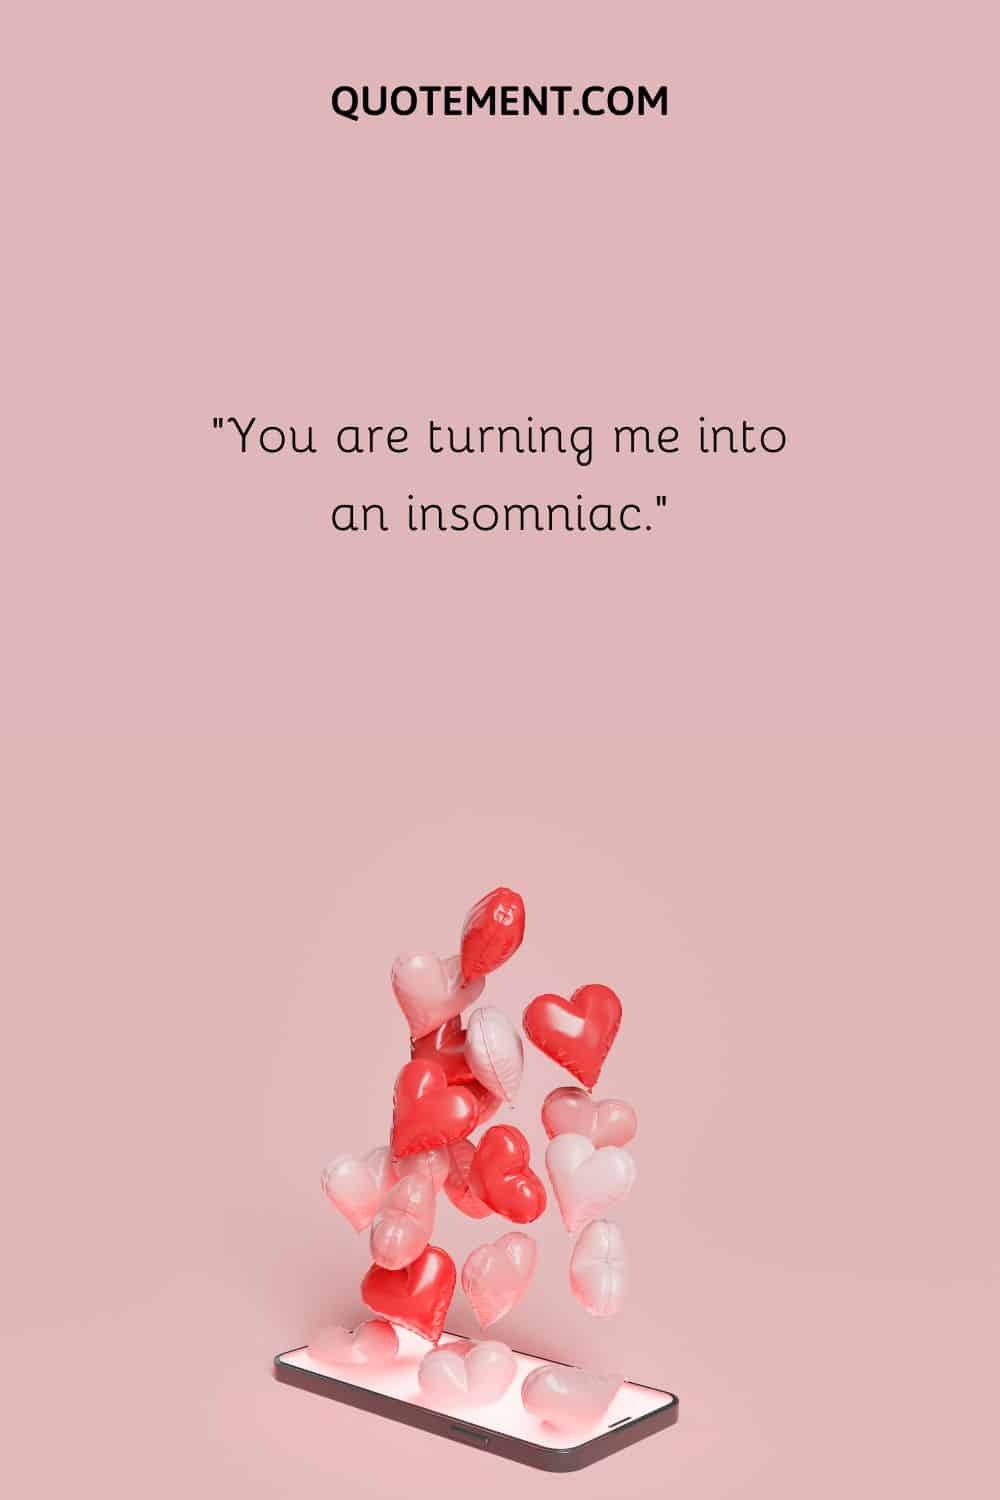 “You are turning me into an insomniac.”